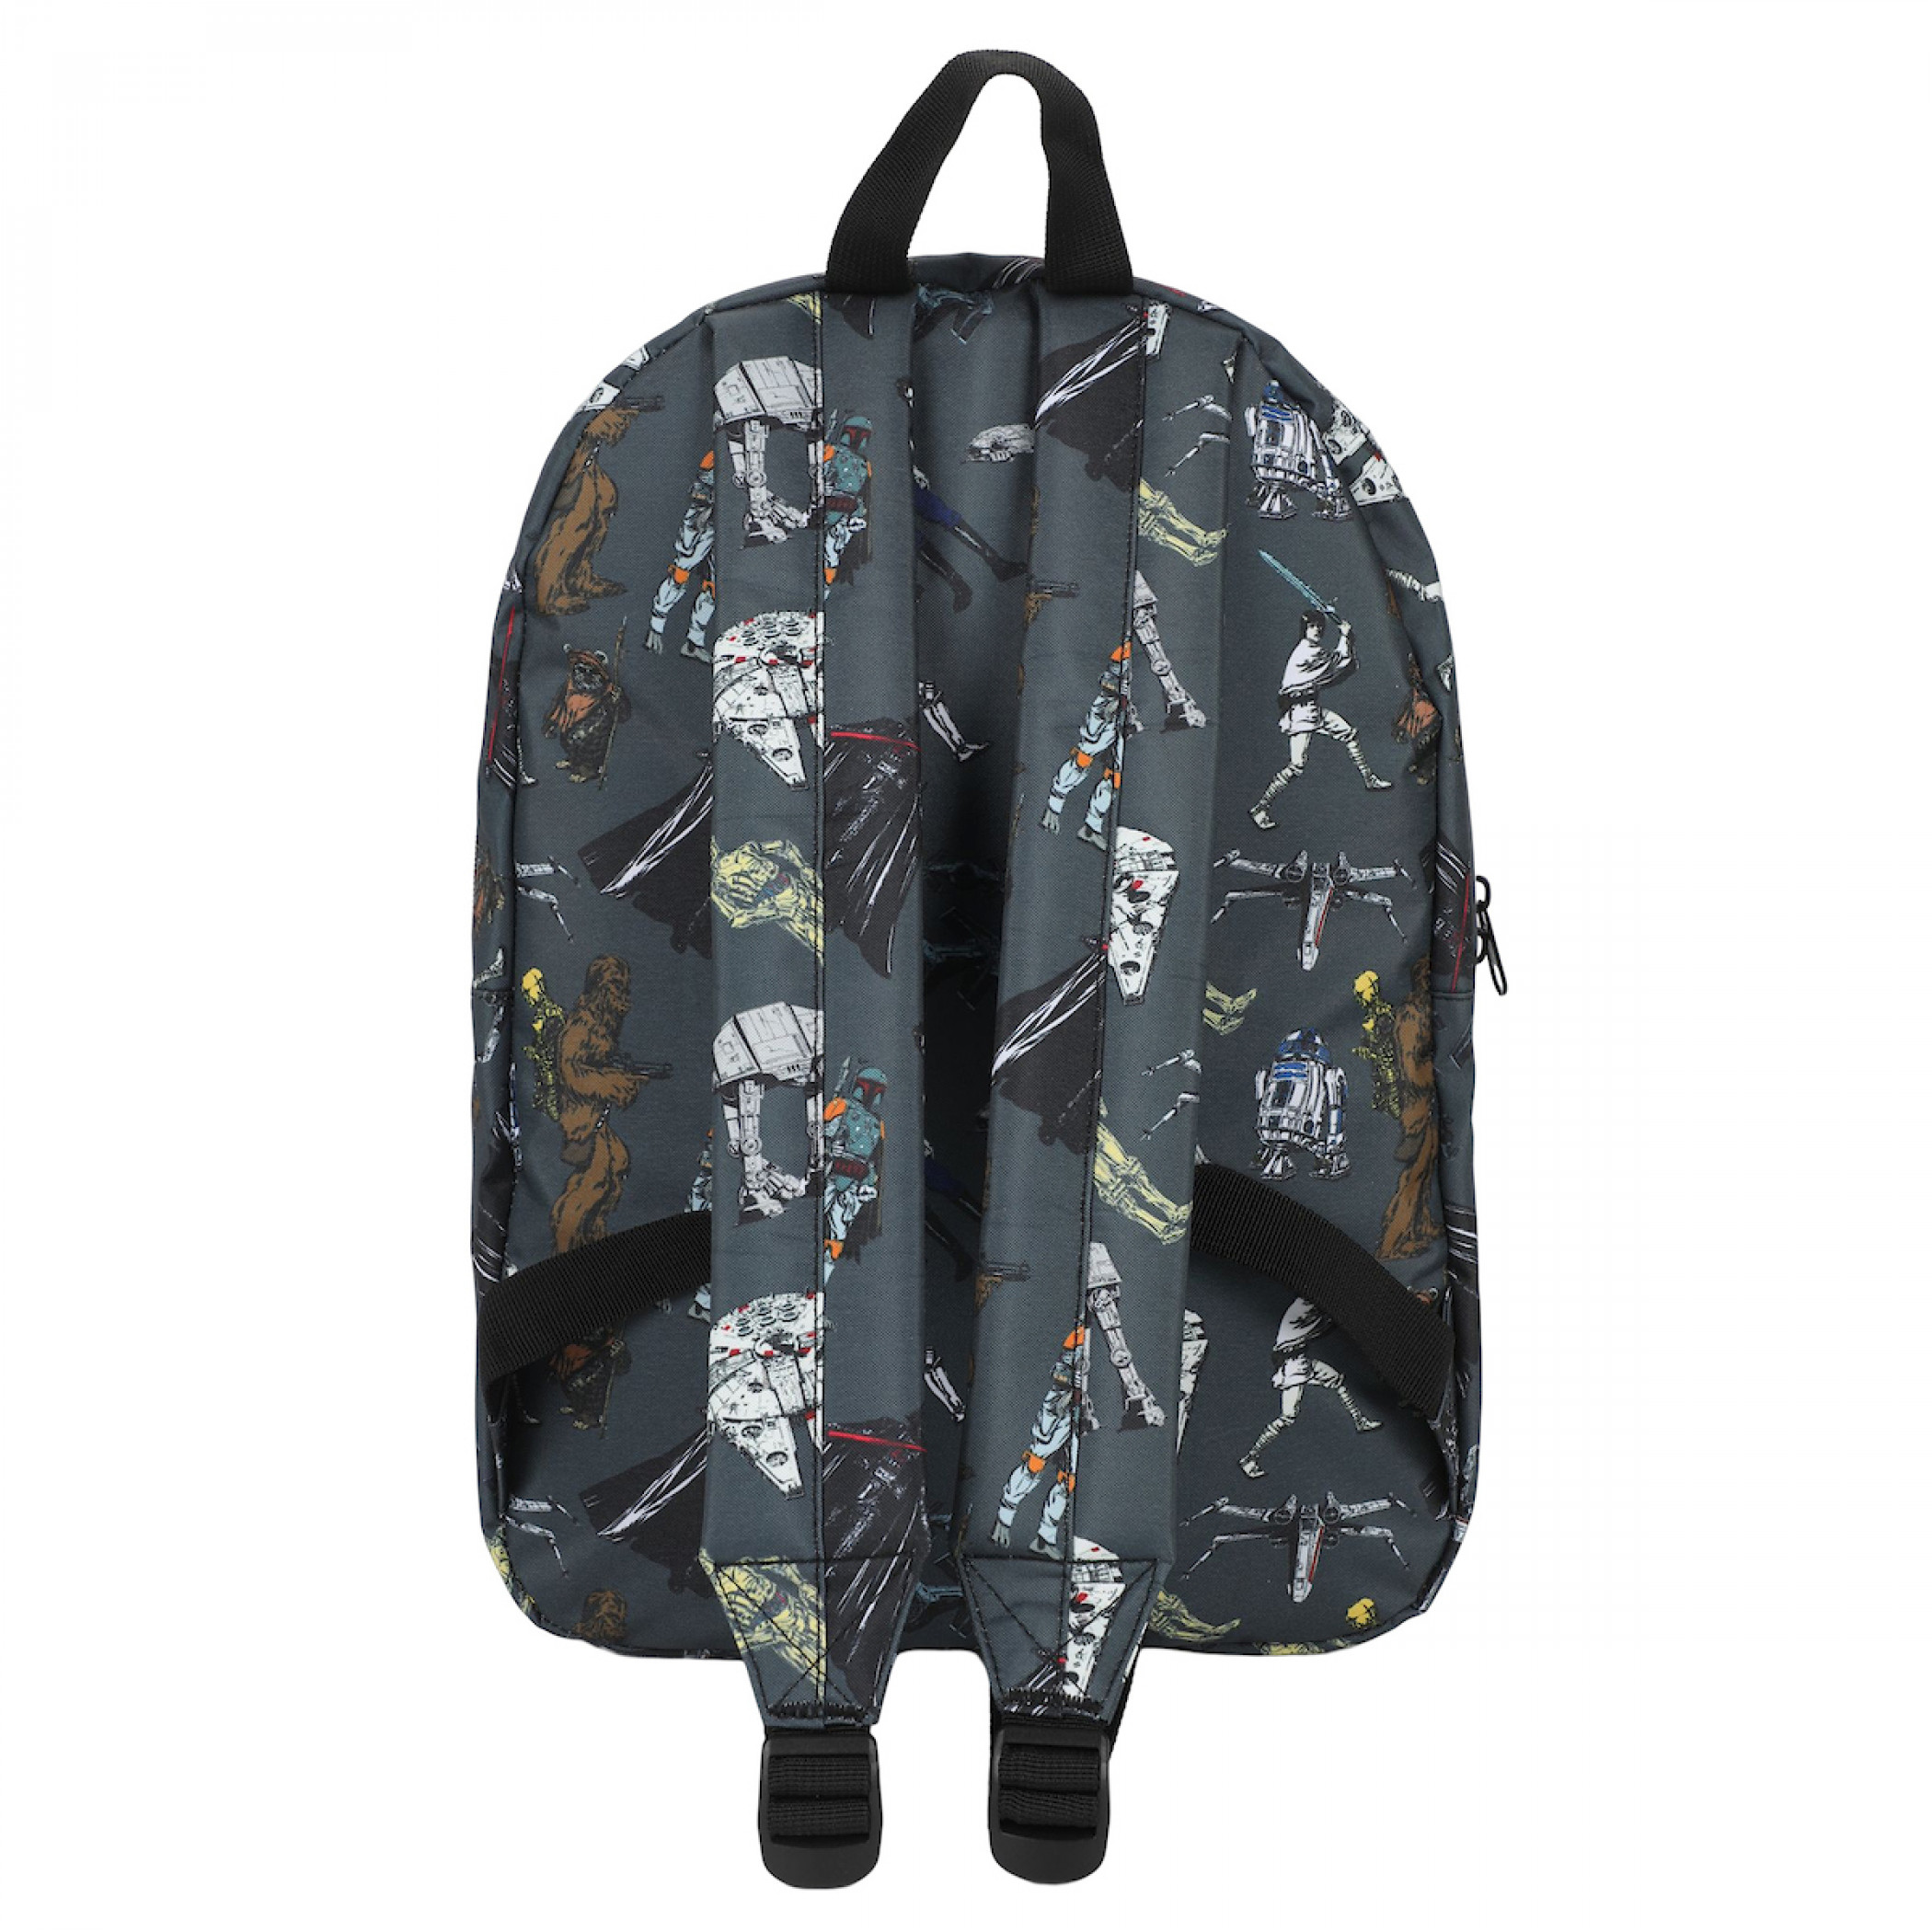 Star Wars Characters and Vehicles 15" Laptop Backpack